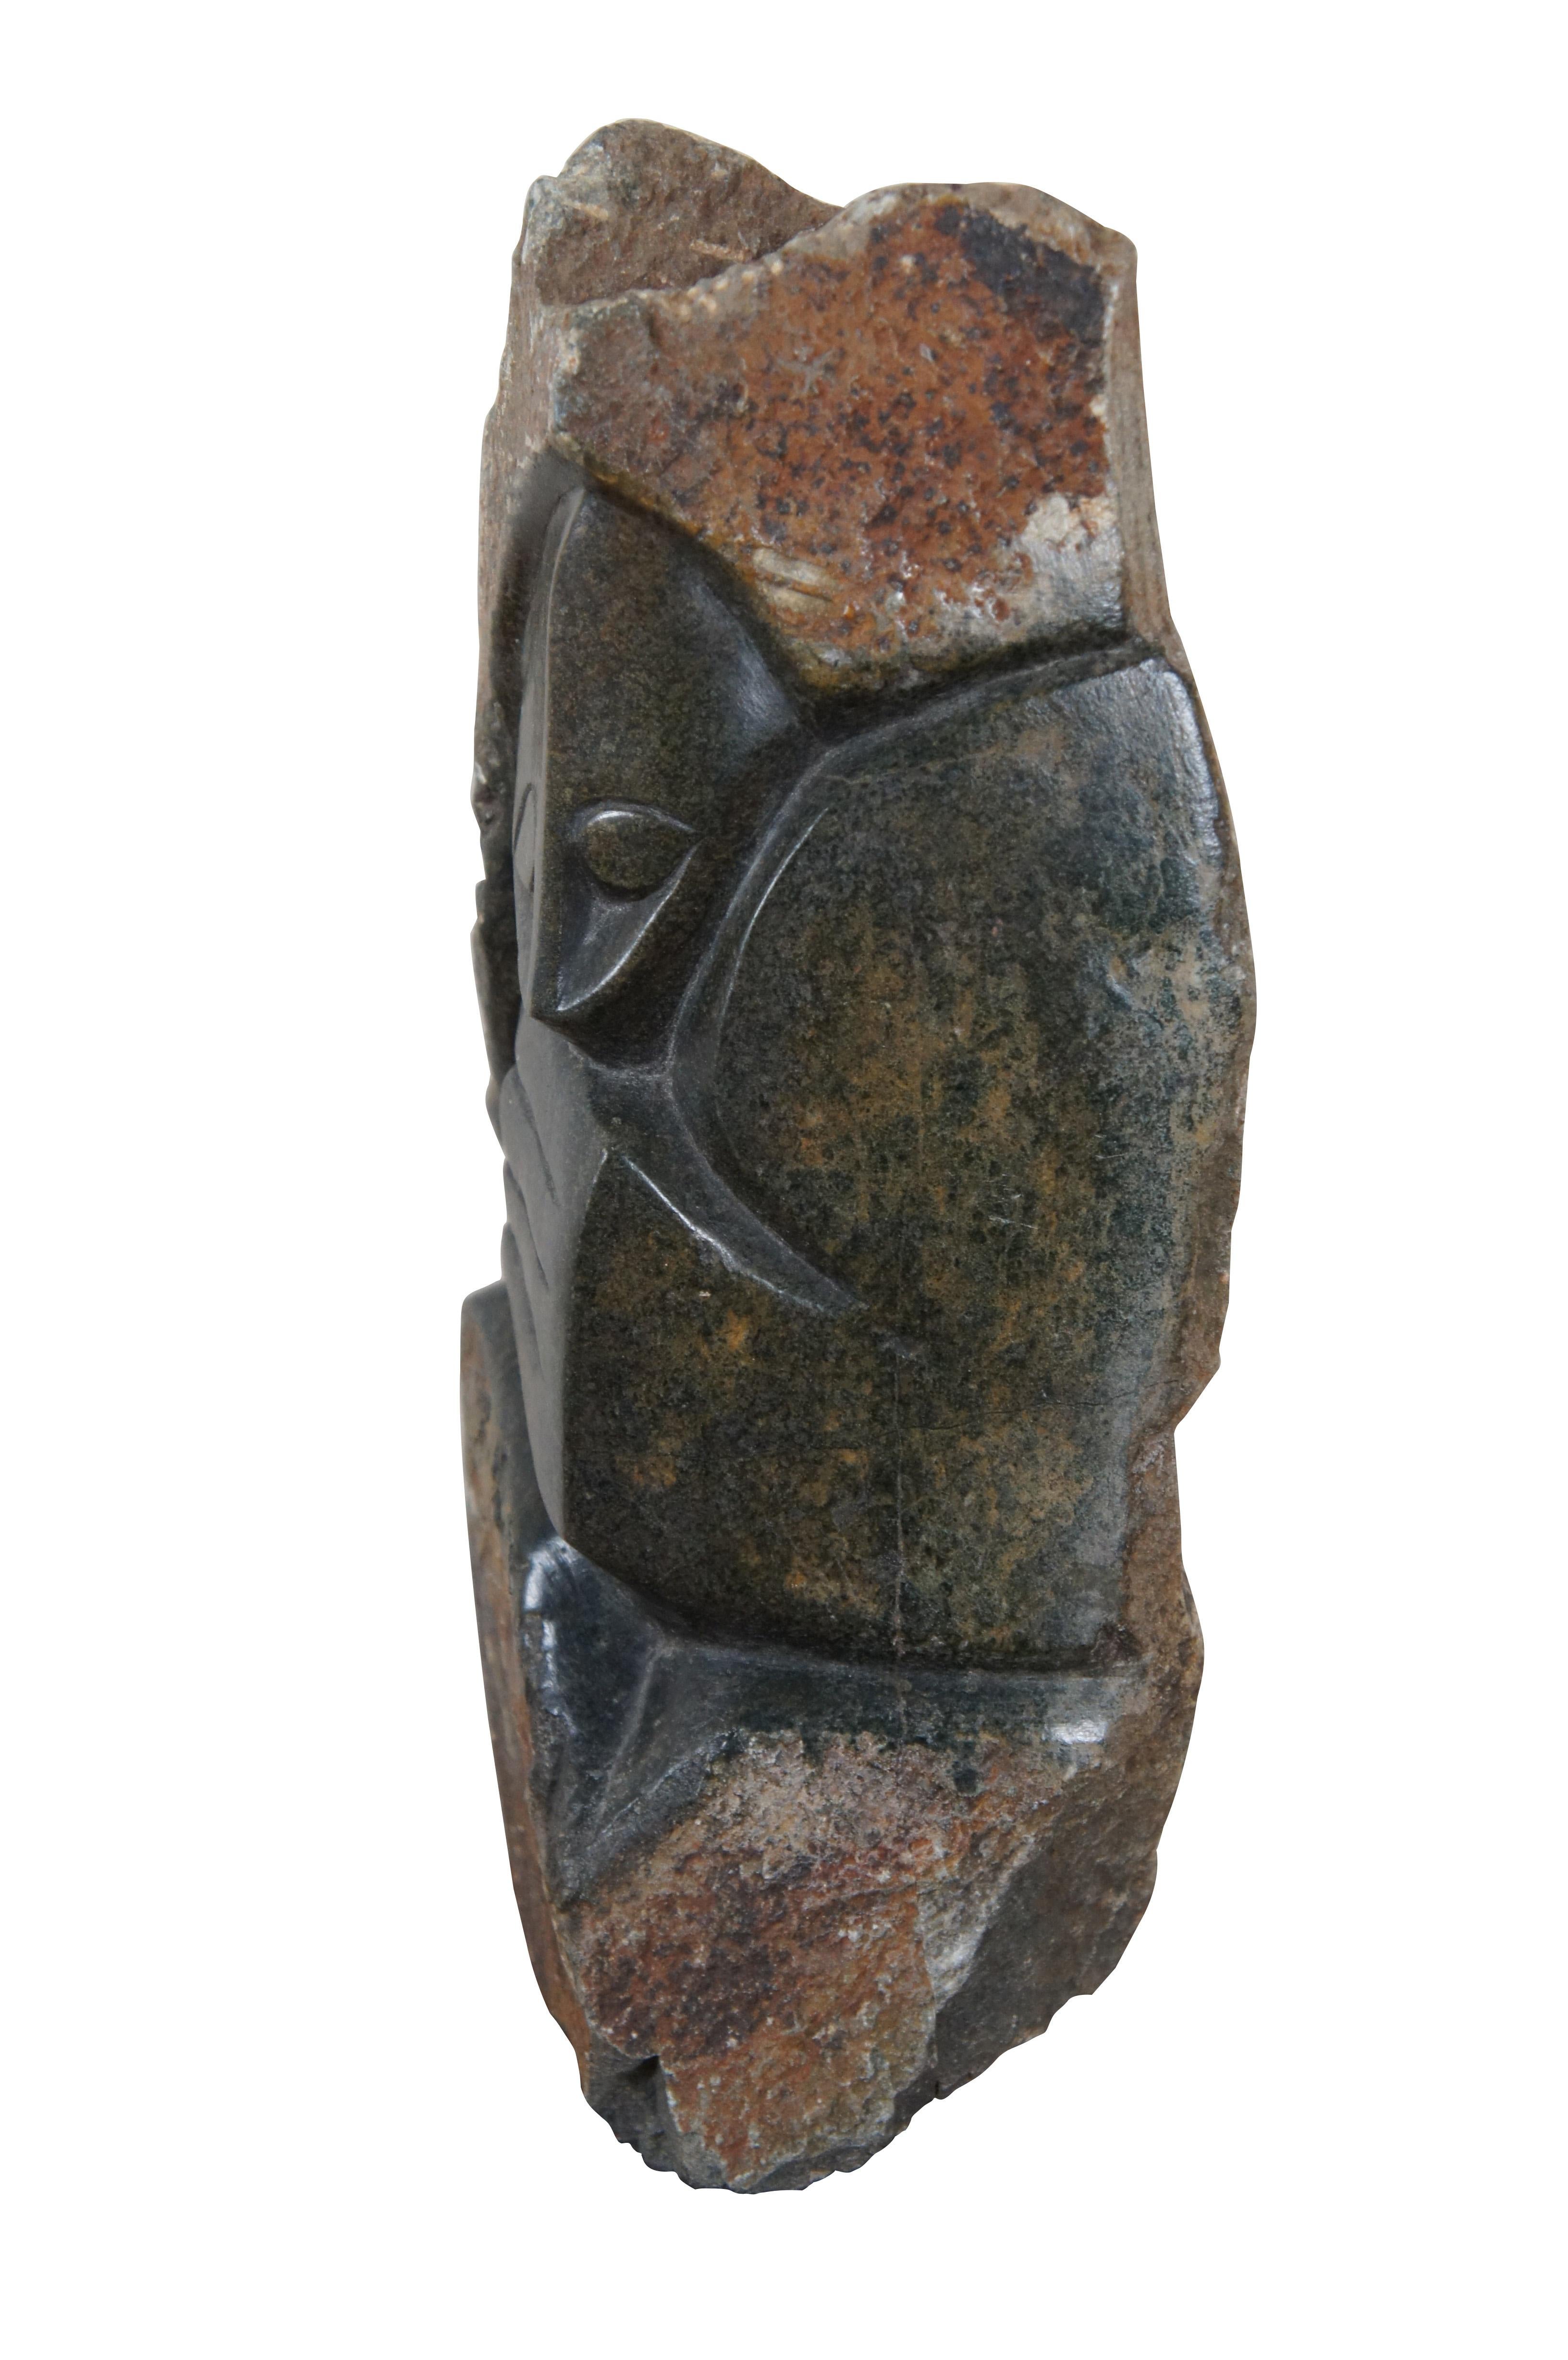 Vintage heavy African Shona folk art sculpture featuring an smoothly finished child with mothers hand / arm, nestled in a slab of unfinished granite rock.

“Shona sculpture is the name given to a modern movement of stone carved sculpture created in